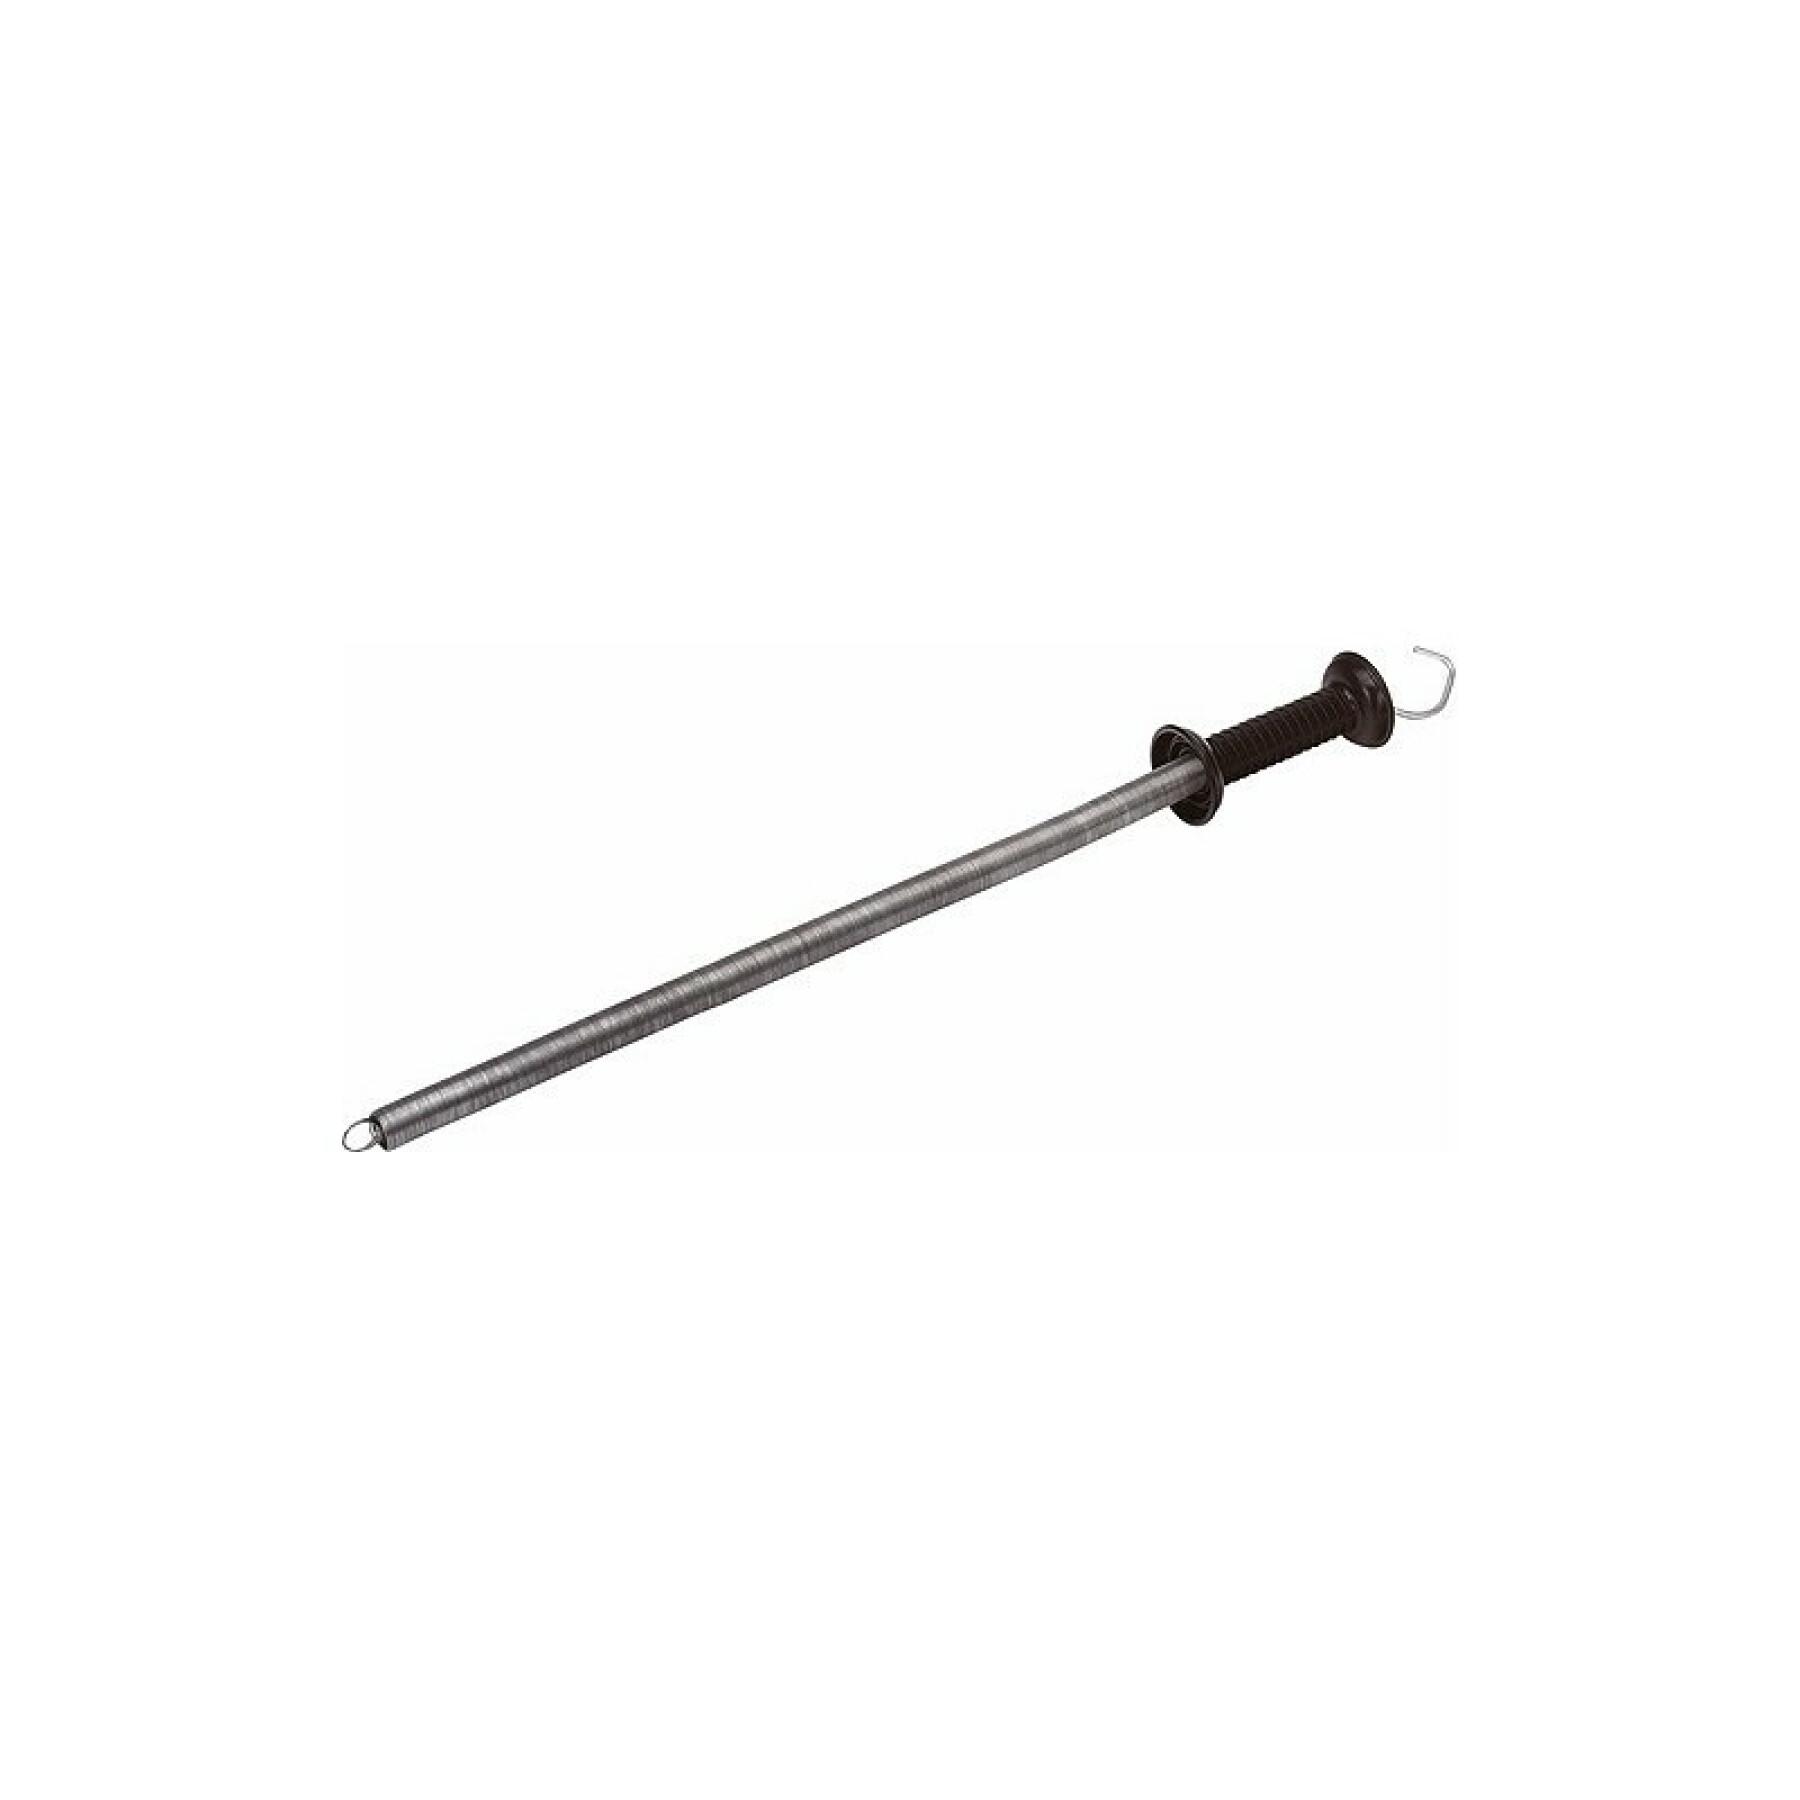 Insulating handle with spring Beaumont